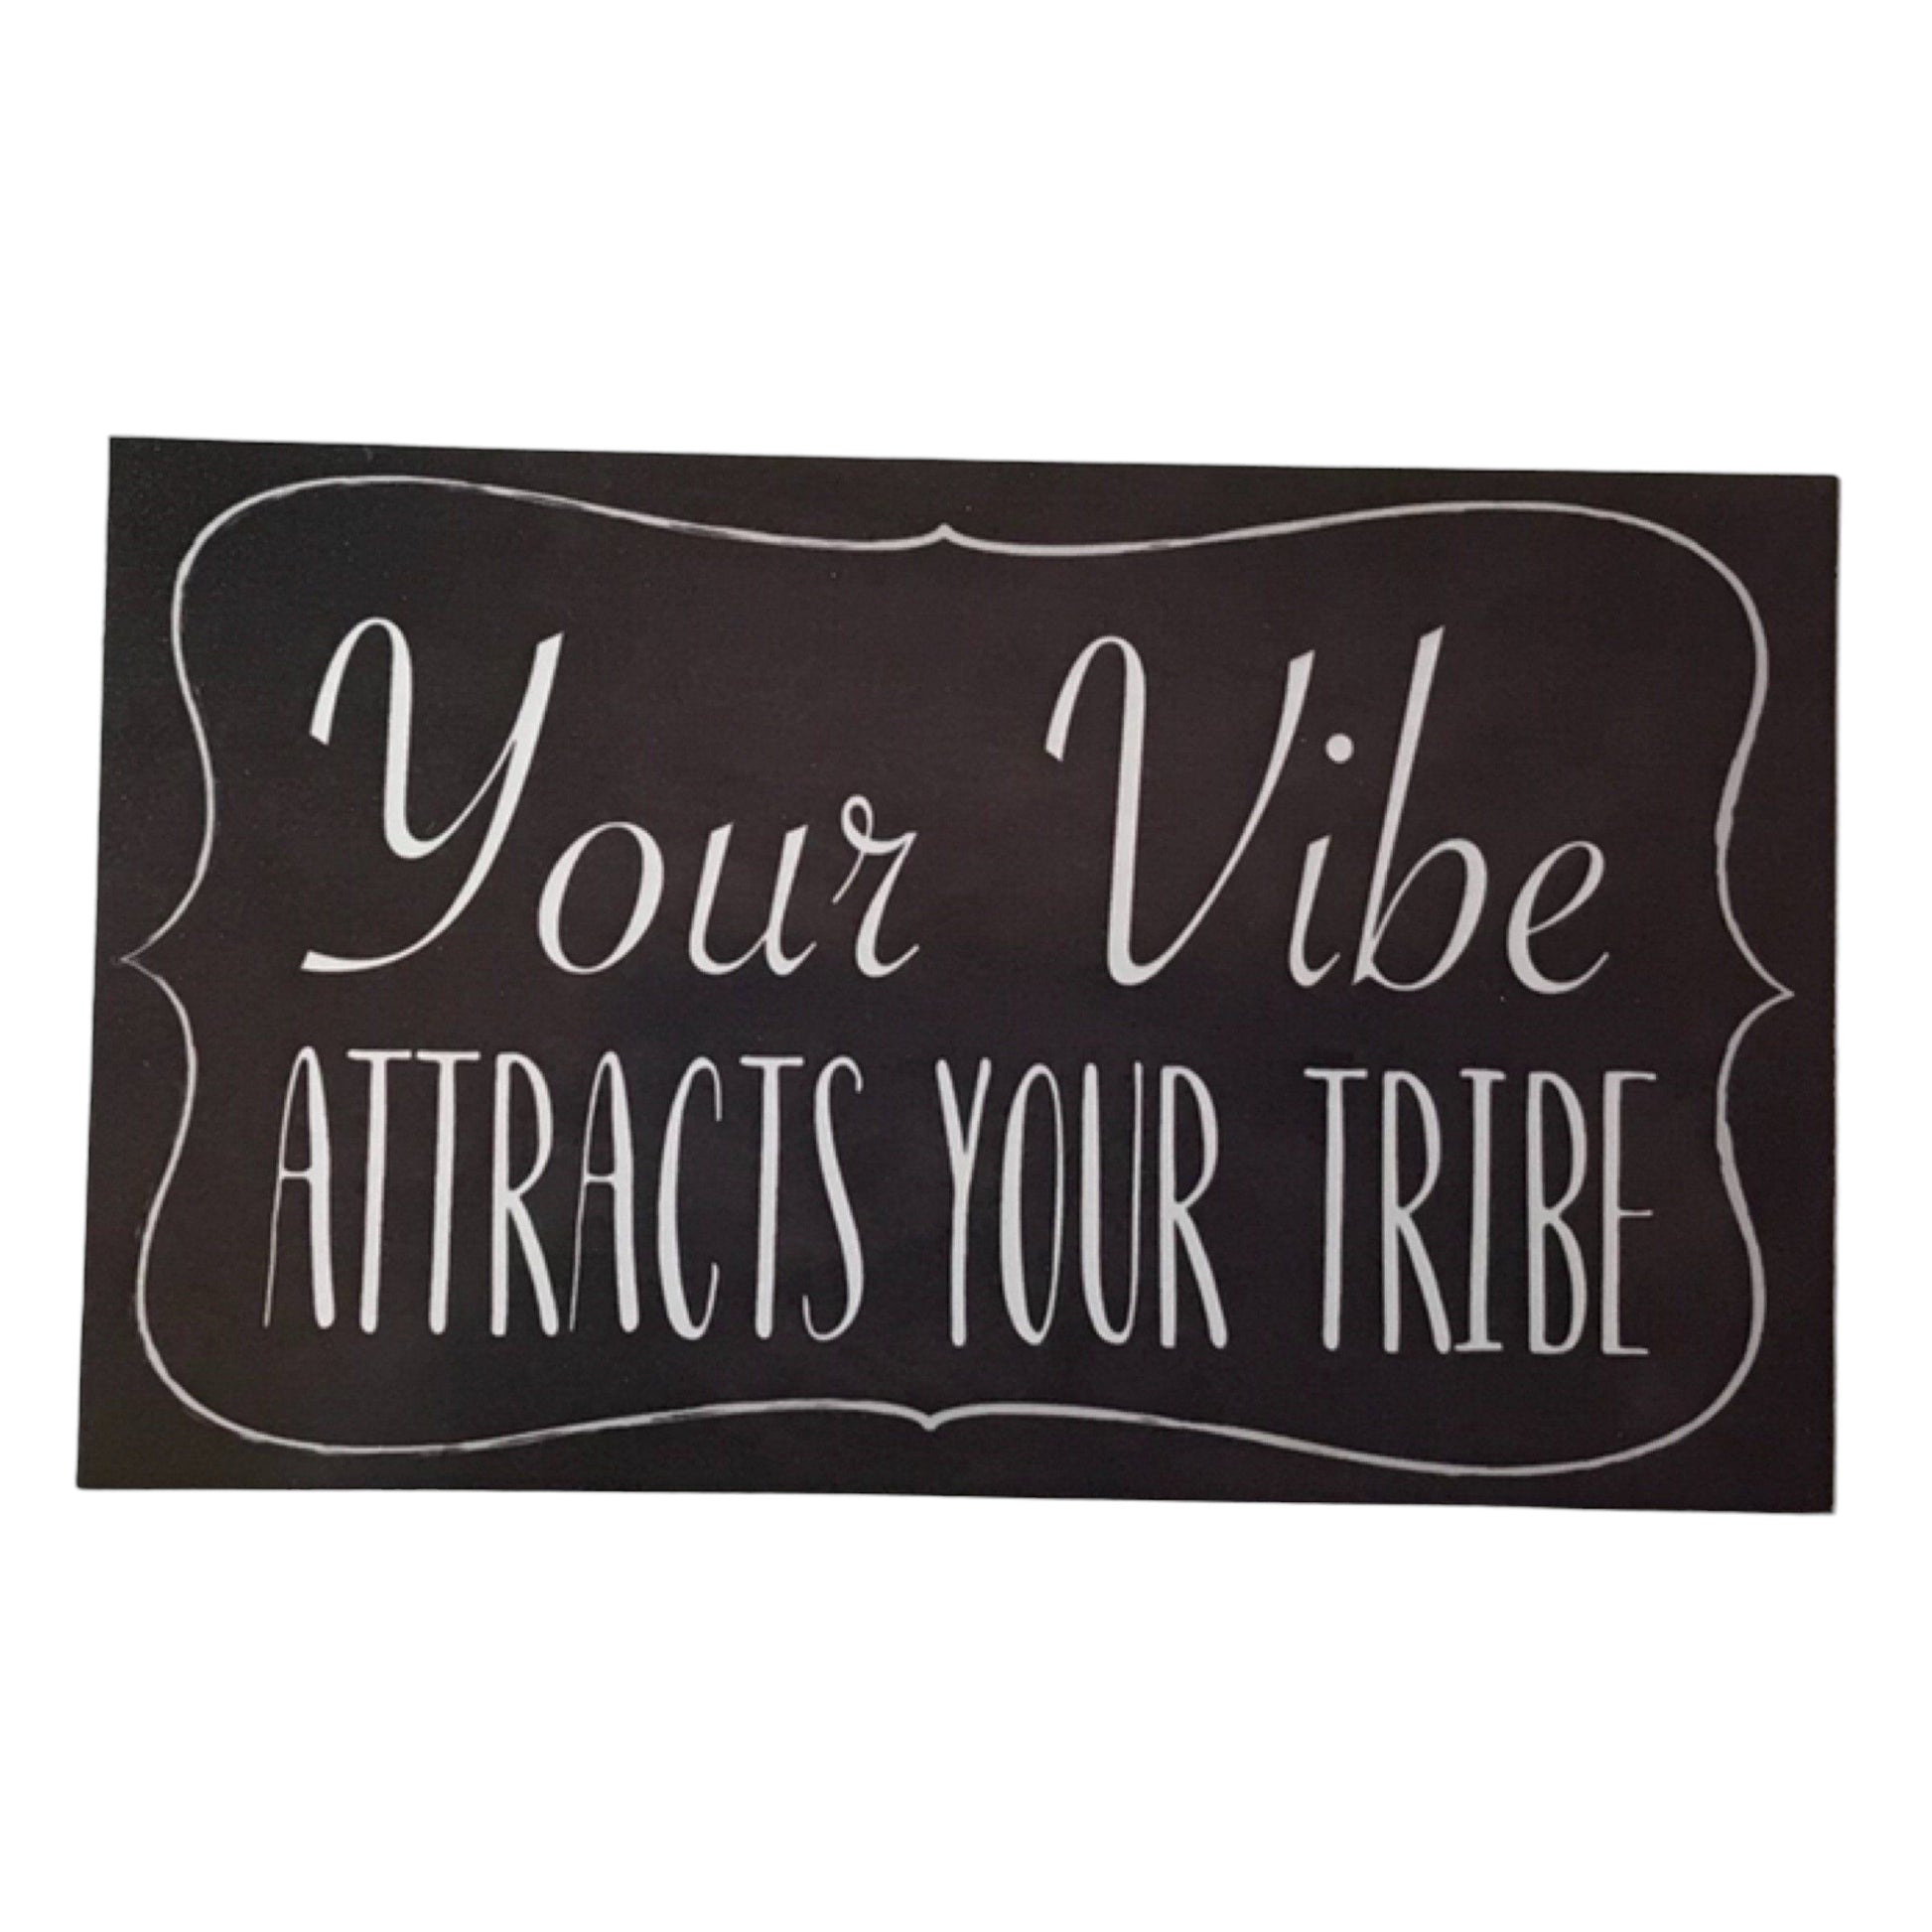 Your Vibe Attracts Your Tribe Sign - The Renmy Store Homewares & Gifts 